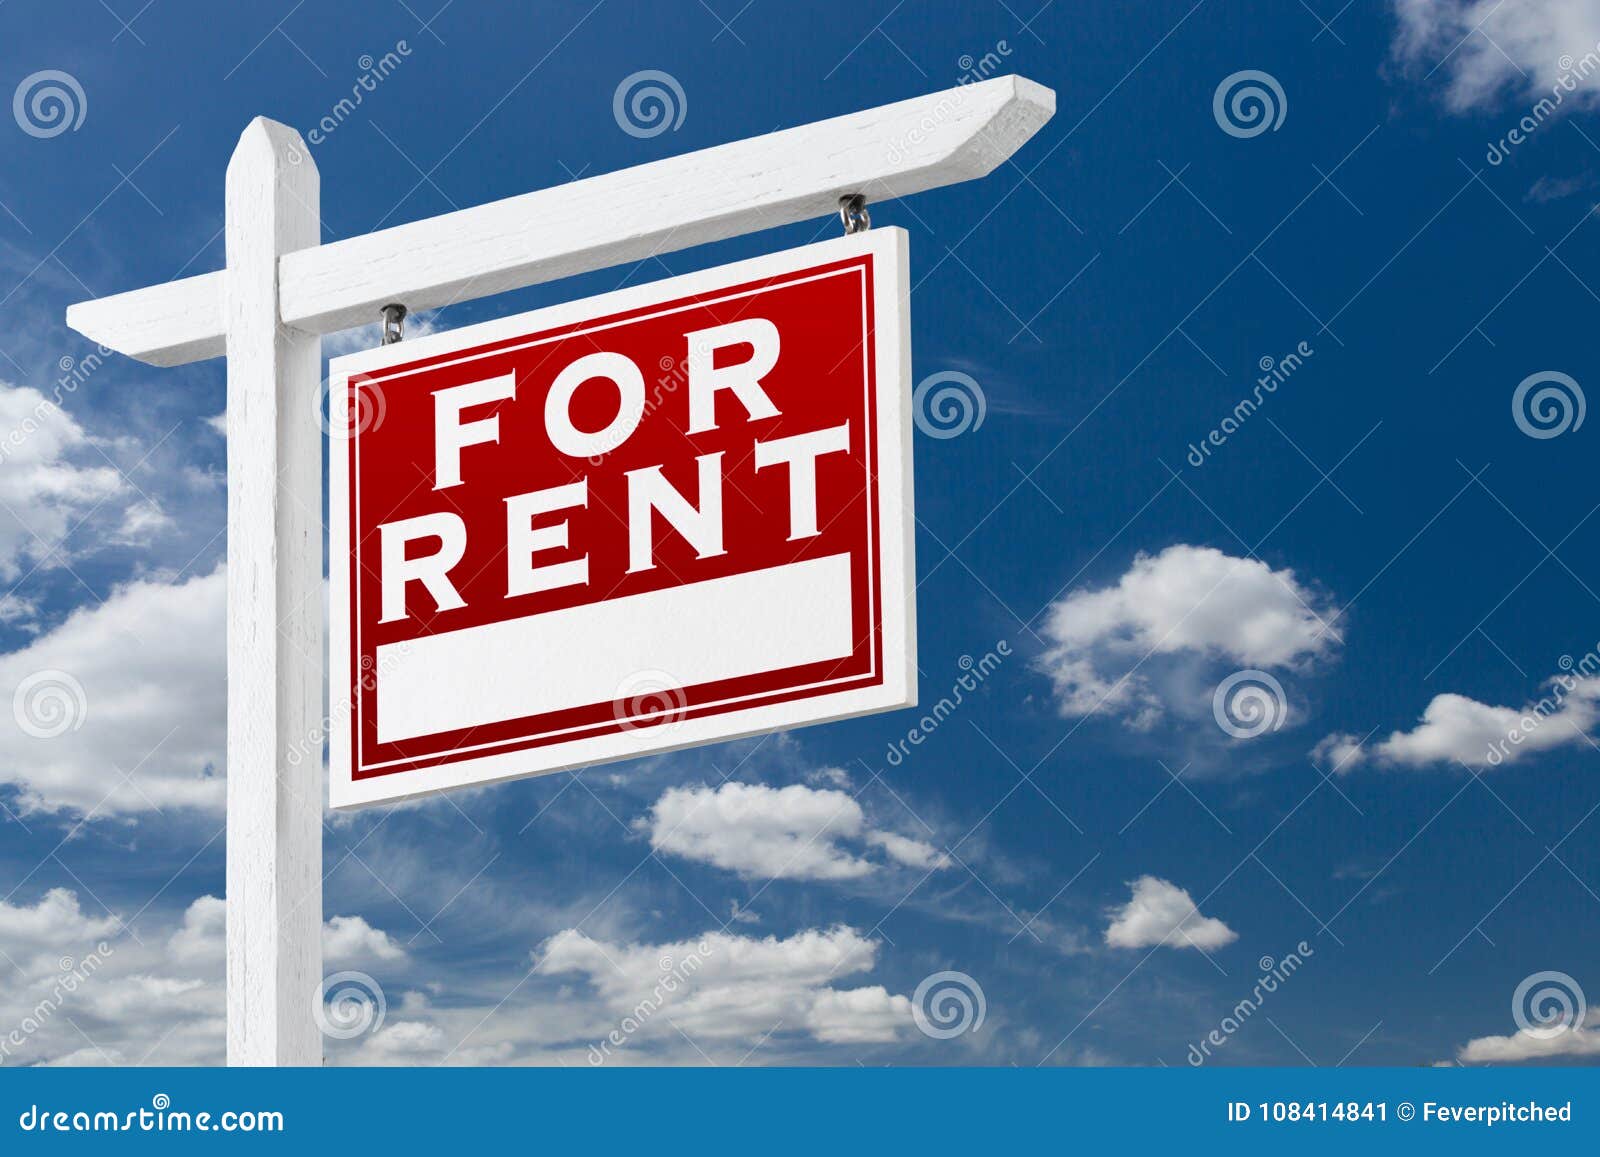 right facing for rent real estate sign over blue sky and clouds